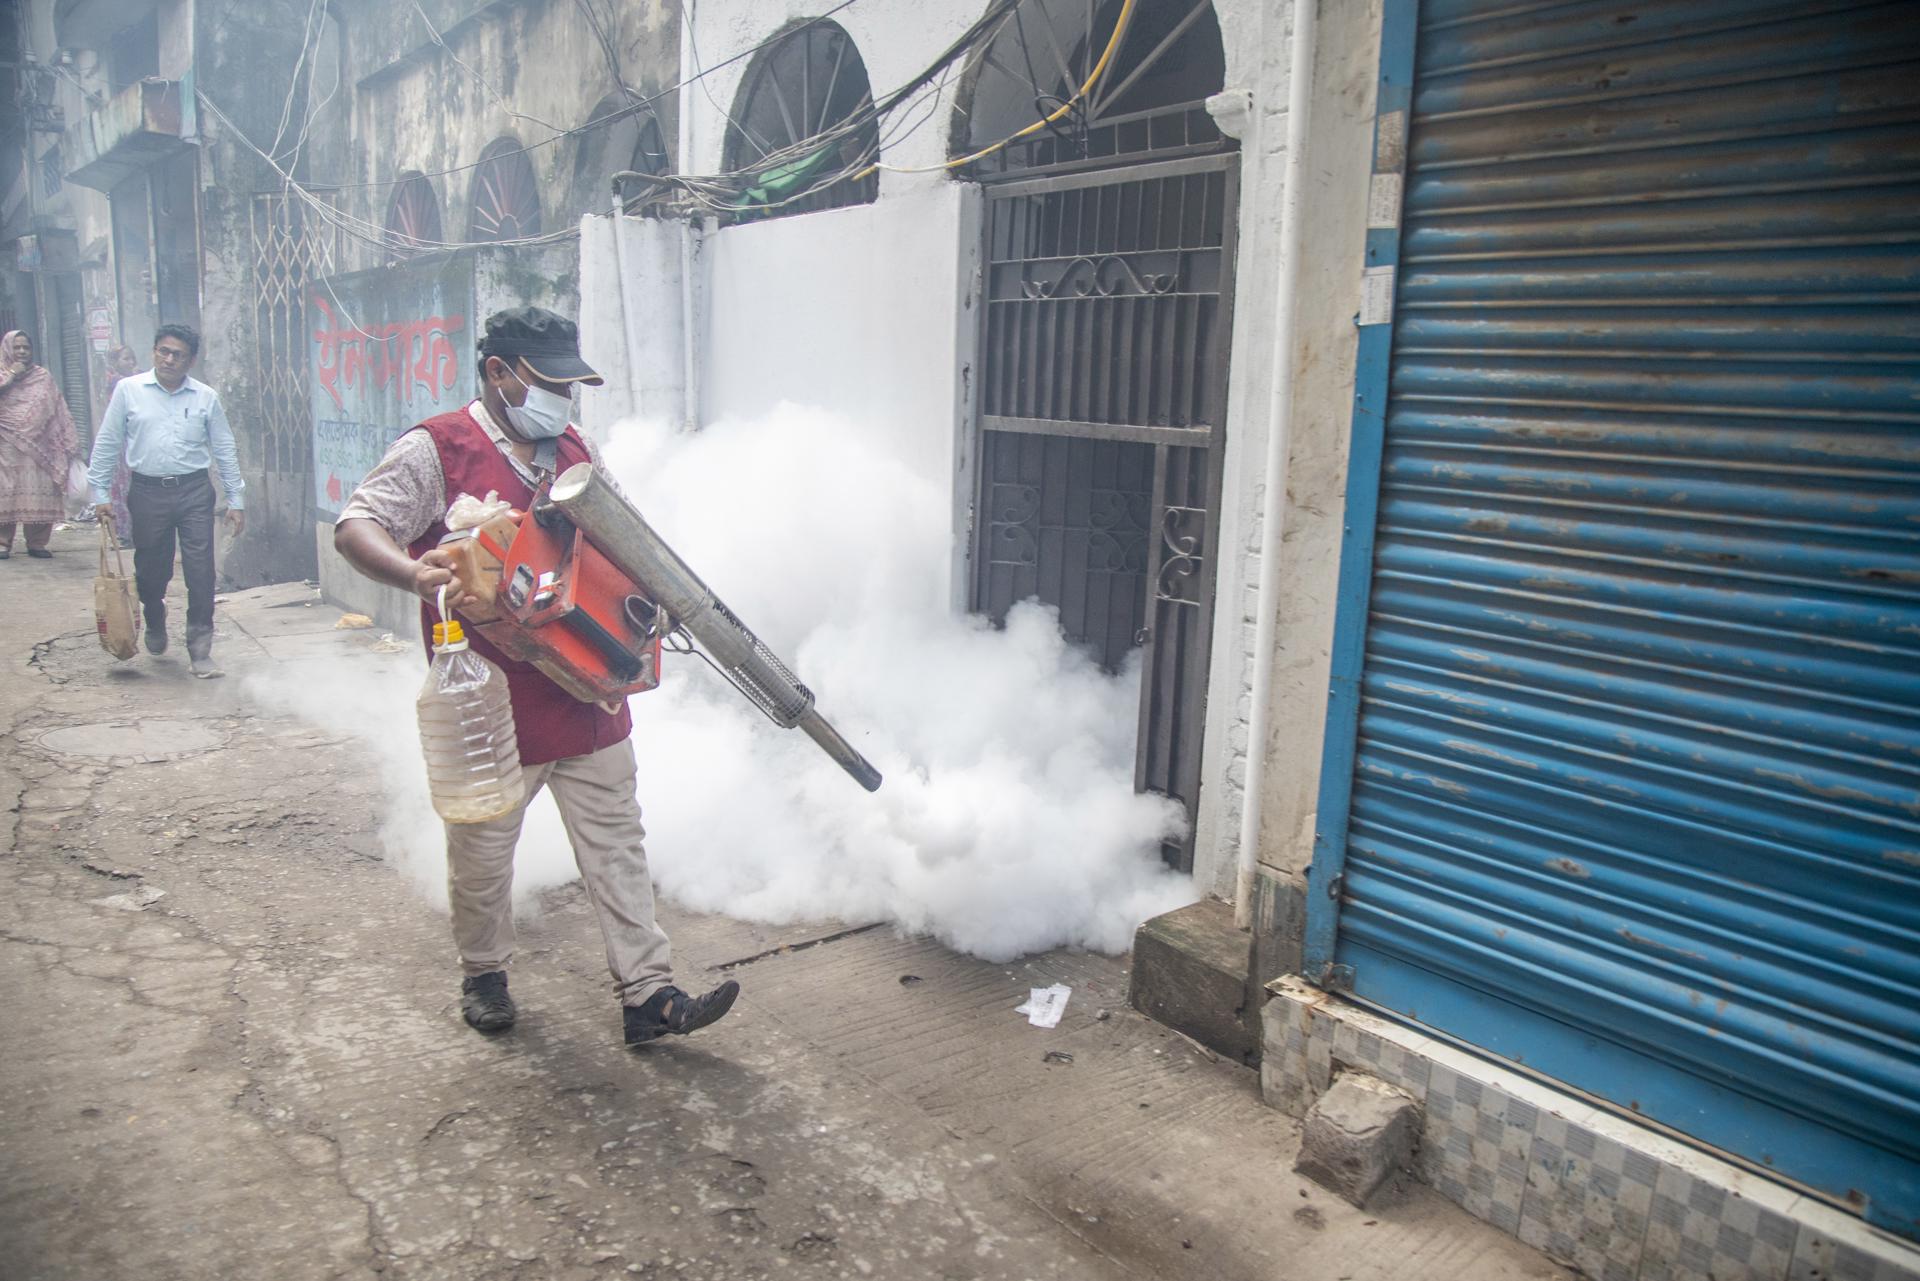 Dhaka South City Corporation (DSCC) worker sprays insecticides to kill mosquitos in Dhaka, Bangladesh, 10 July 2023. The numbers of cases diagnosed with dengue fever increased sharply in Bangladesh over the last 24 hours, according to the Directorate General of Health Services (DGHS), in the last 24 hours, 836 dengue patients, including 516 in the capital, are now receiving treatment at hospitals across the country. So far, 12,954 dengue cases have been recorded this year, with 10,131 recoveries and 73 deaths. EFE/EPA/MONIRUL ALAM
